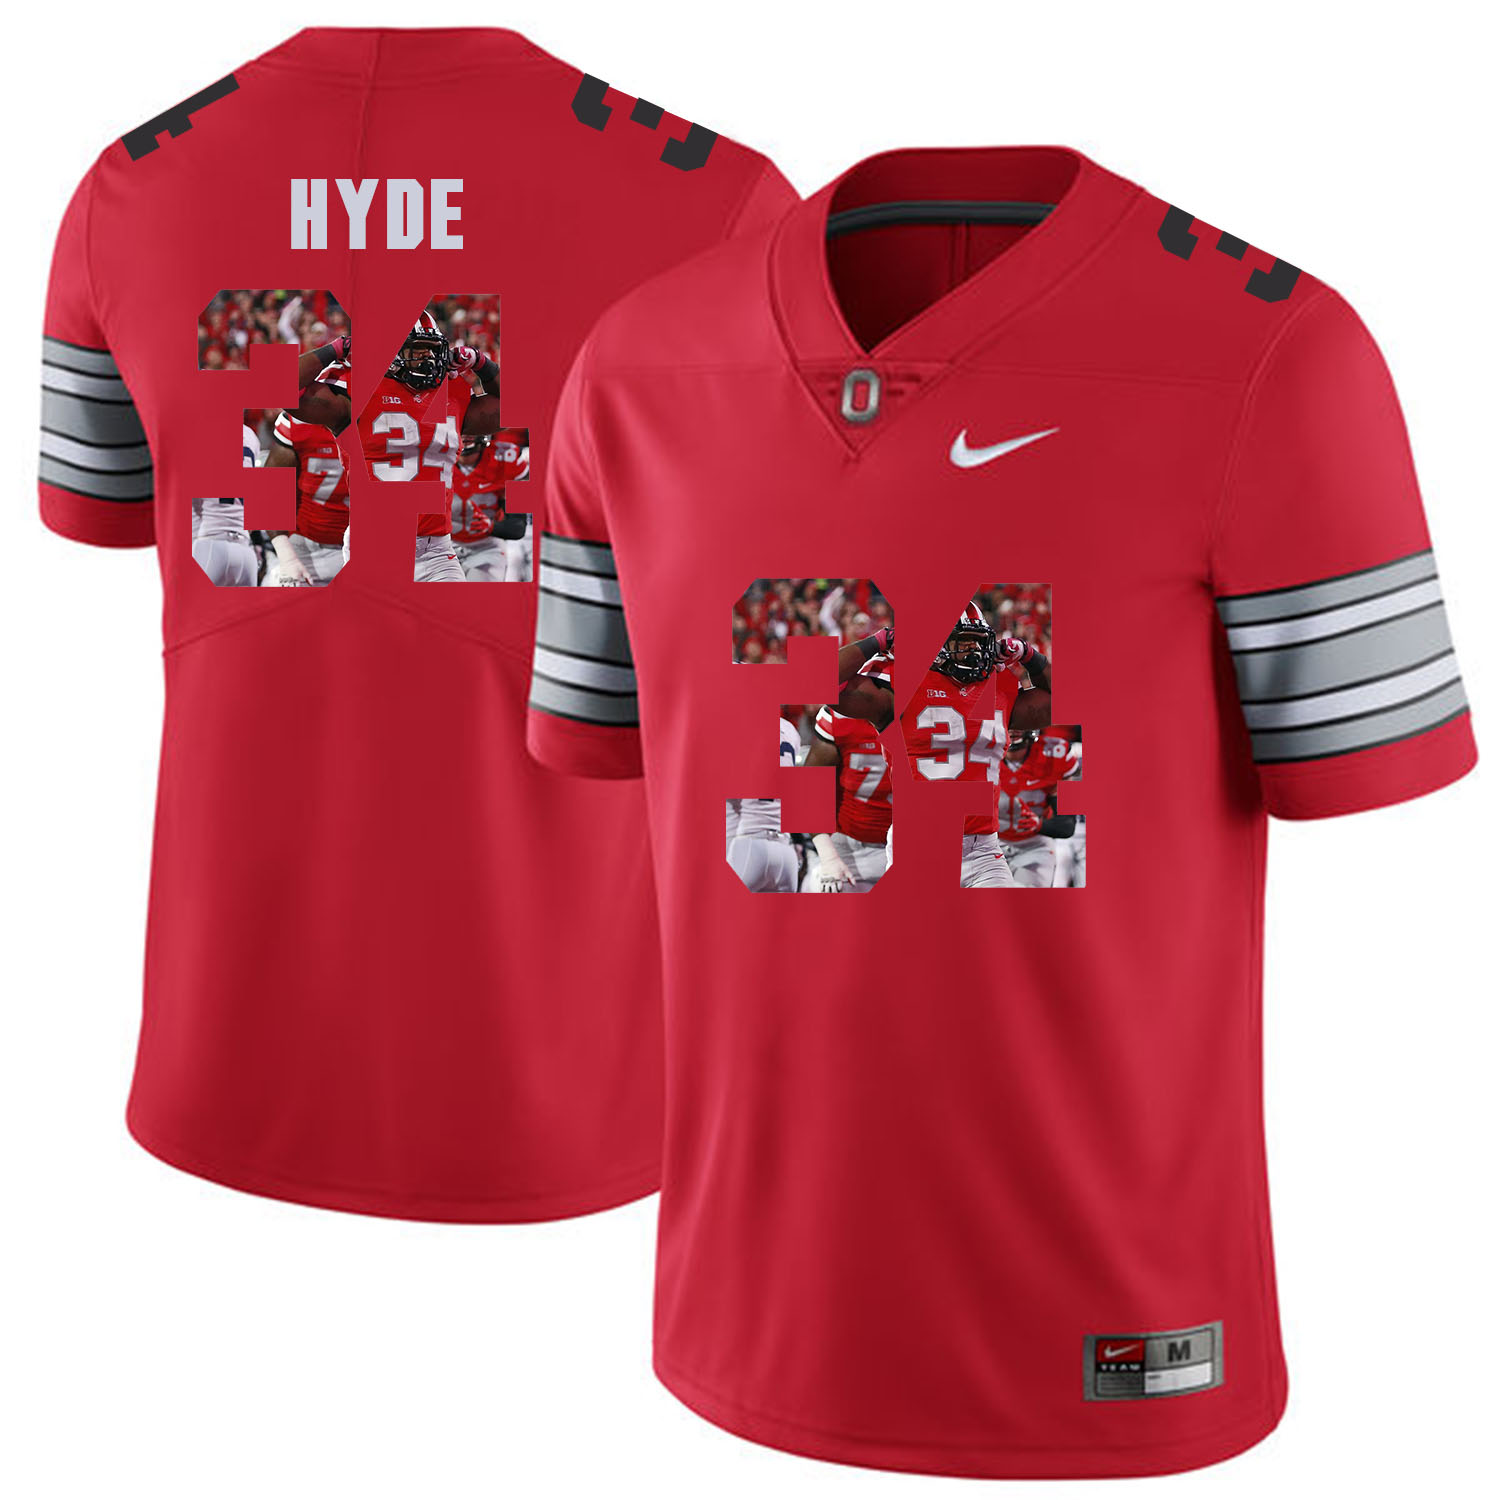 Men Ohio State 34 Hyde Red Fashion Edition Customized NCAA Jerseys